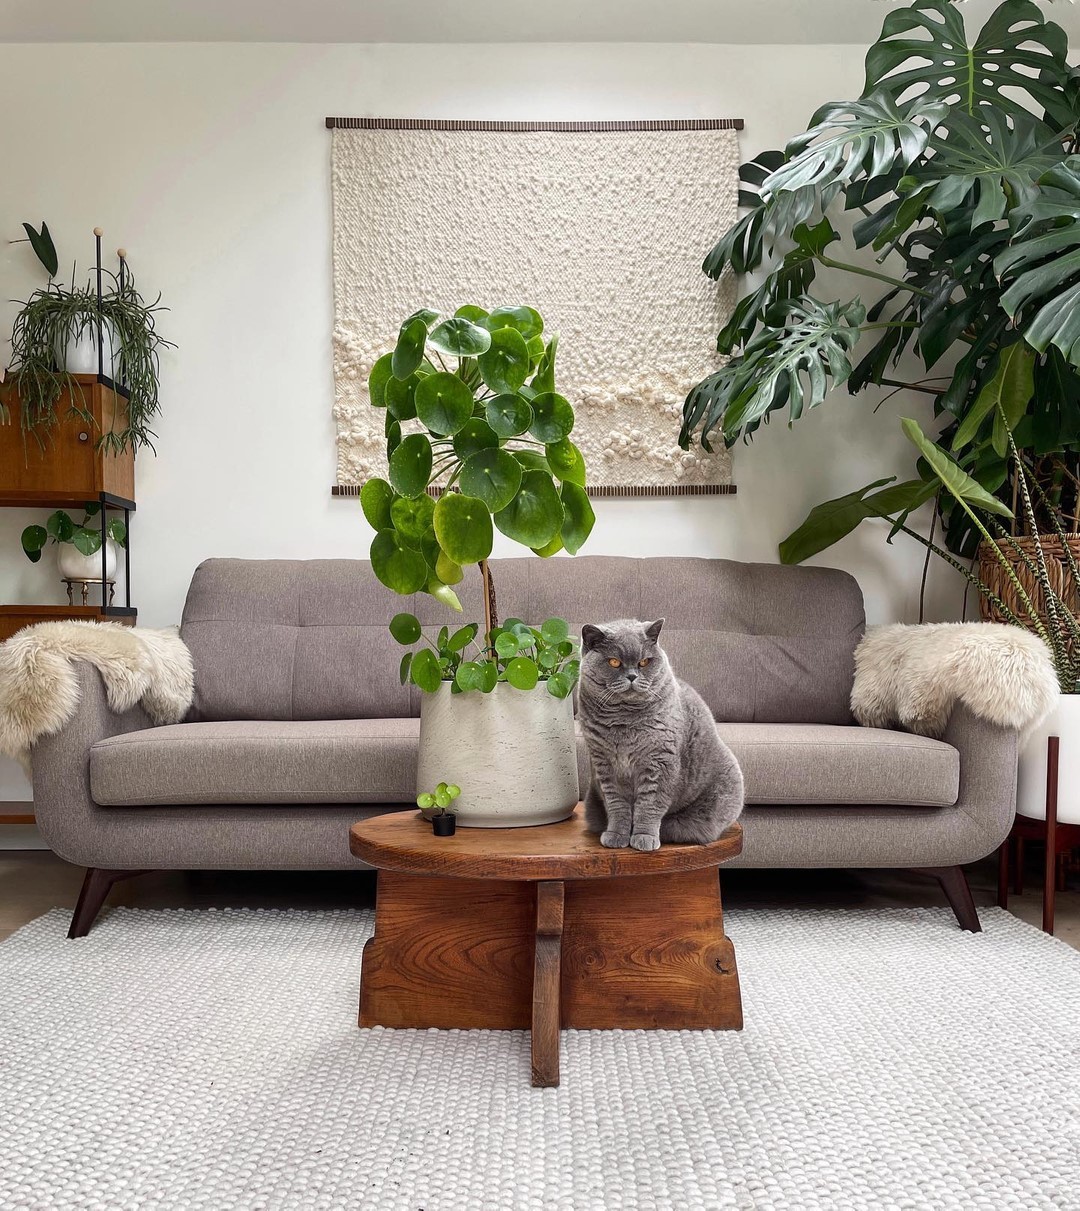 10 special HousePlants to Add to Your Urban Jungle026